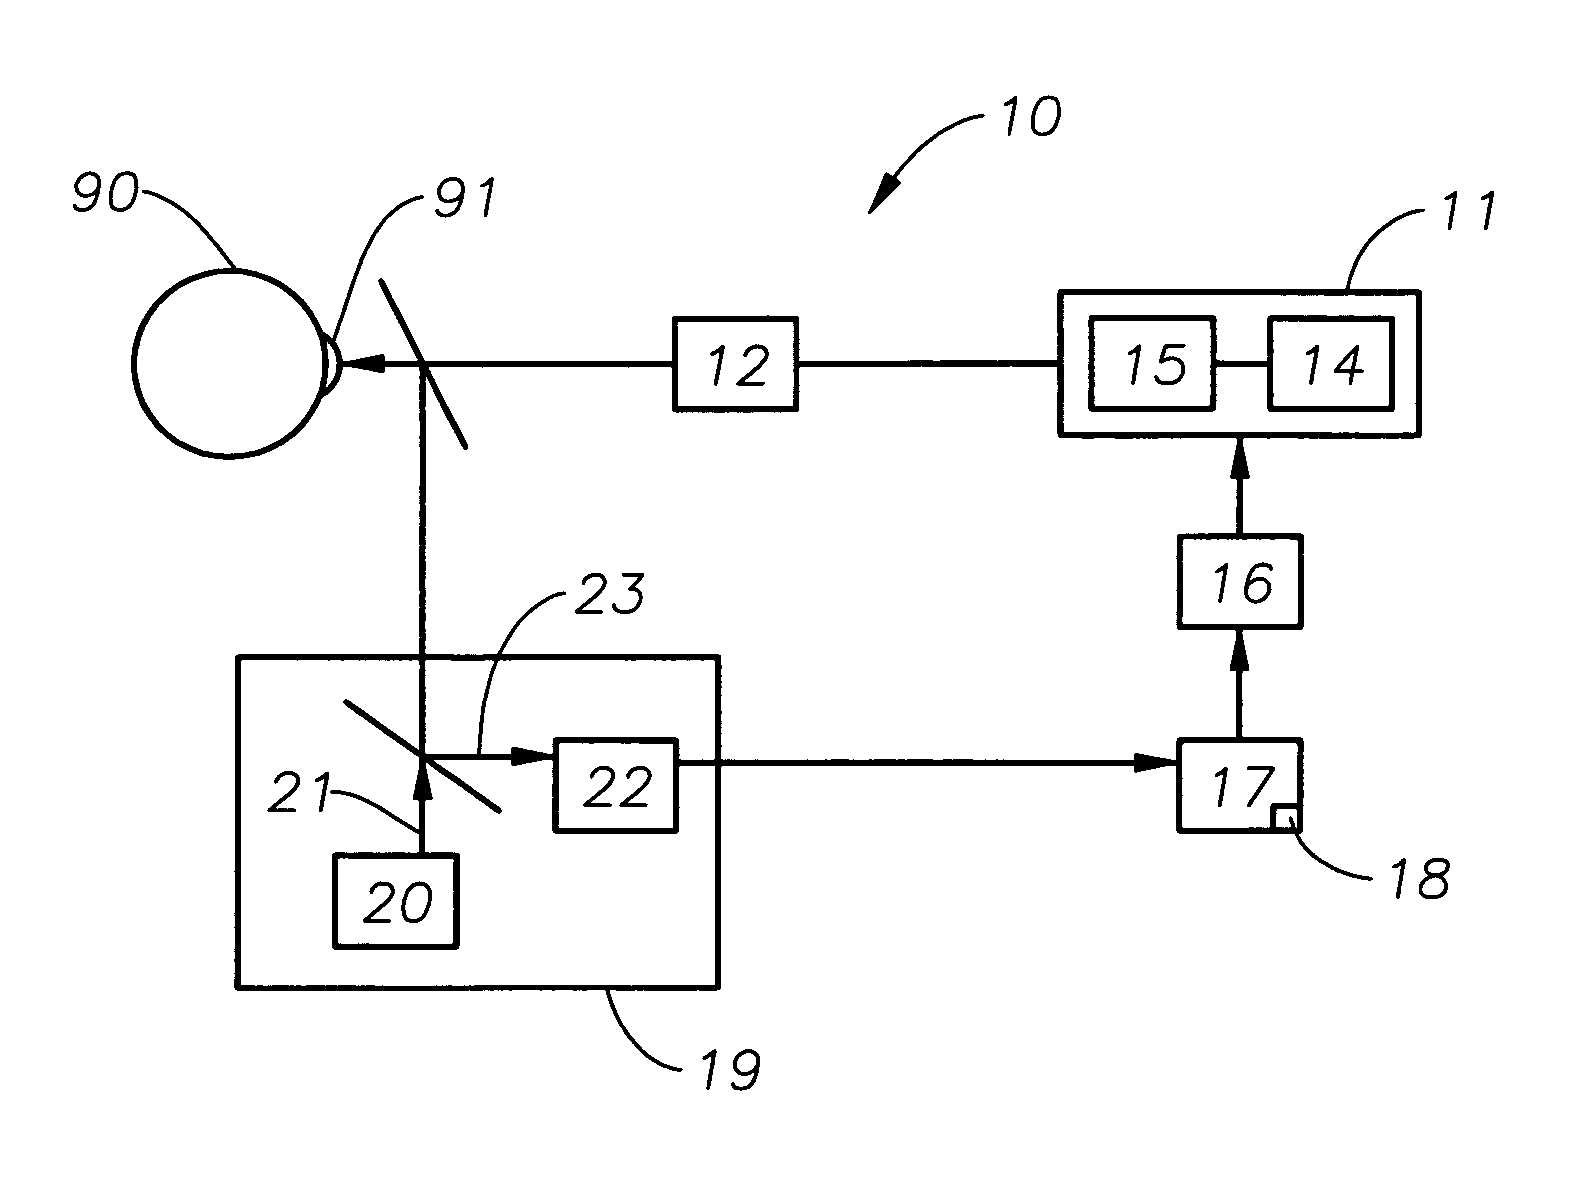 Hybrid eye tracking system and associated methods